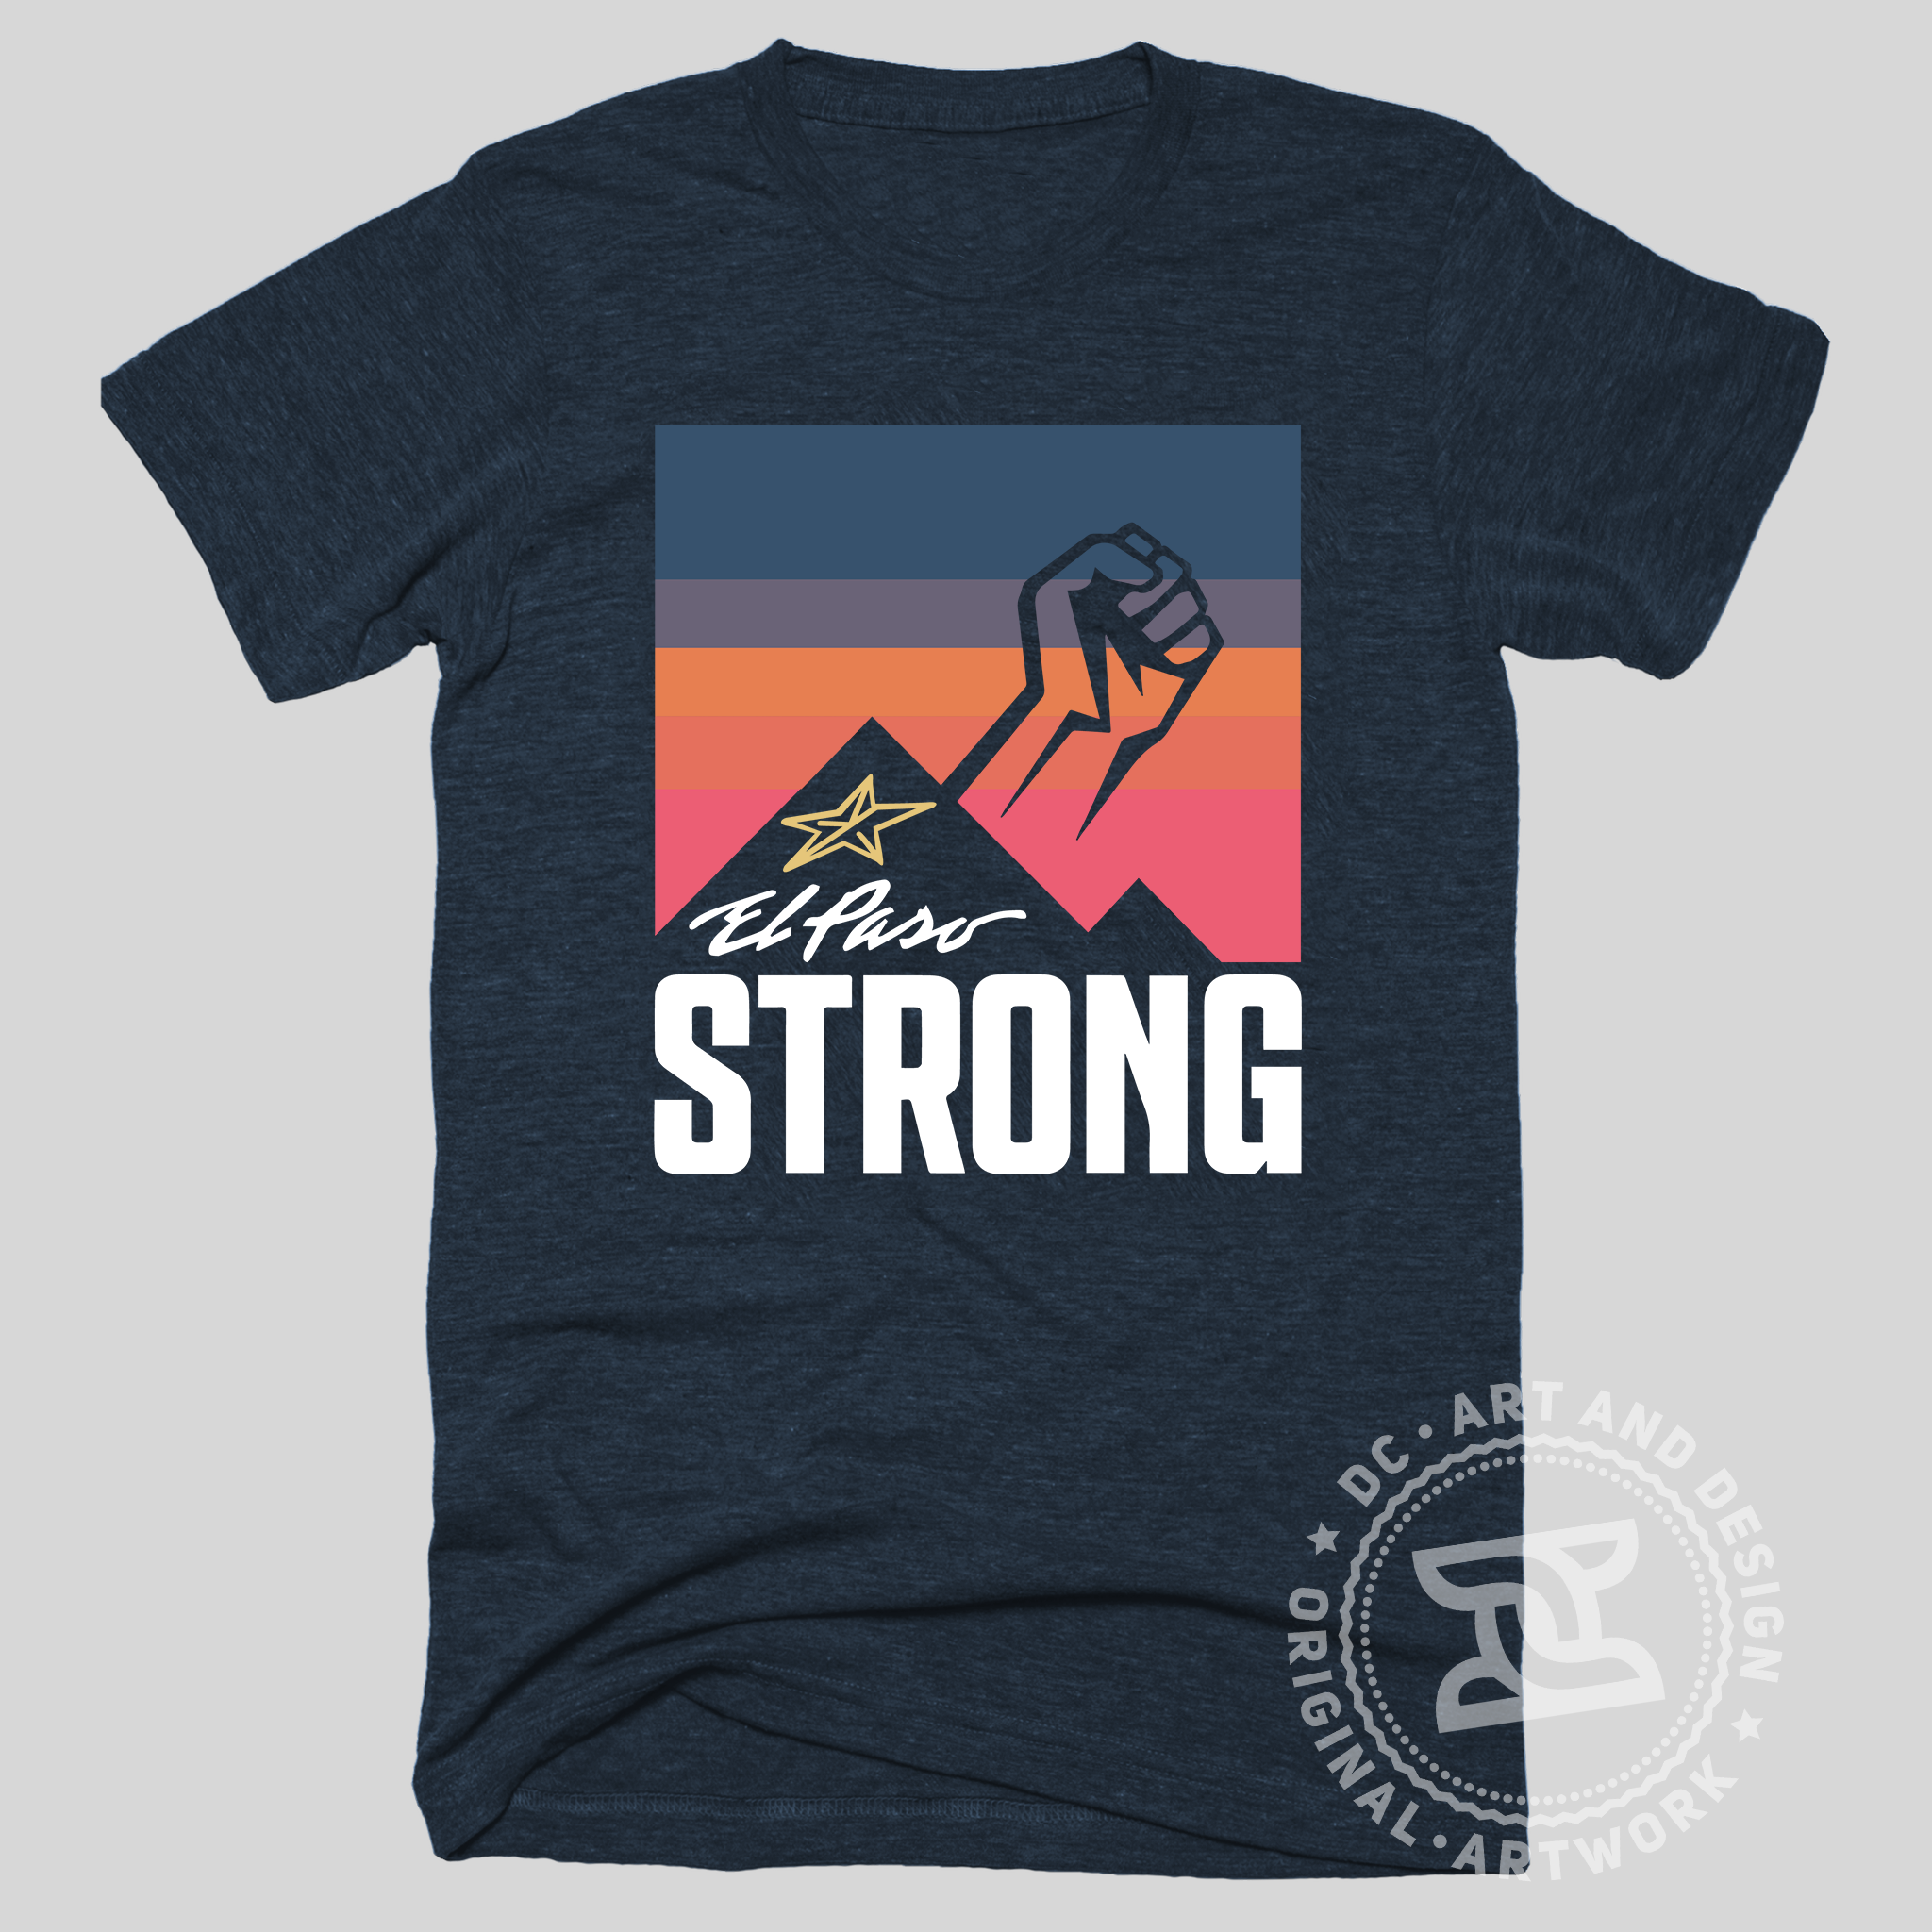 El Paso Strong "Sunset" T-shirt (Midnight Navy) by DC Design